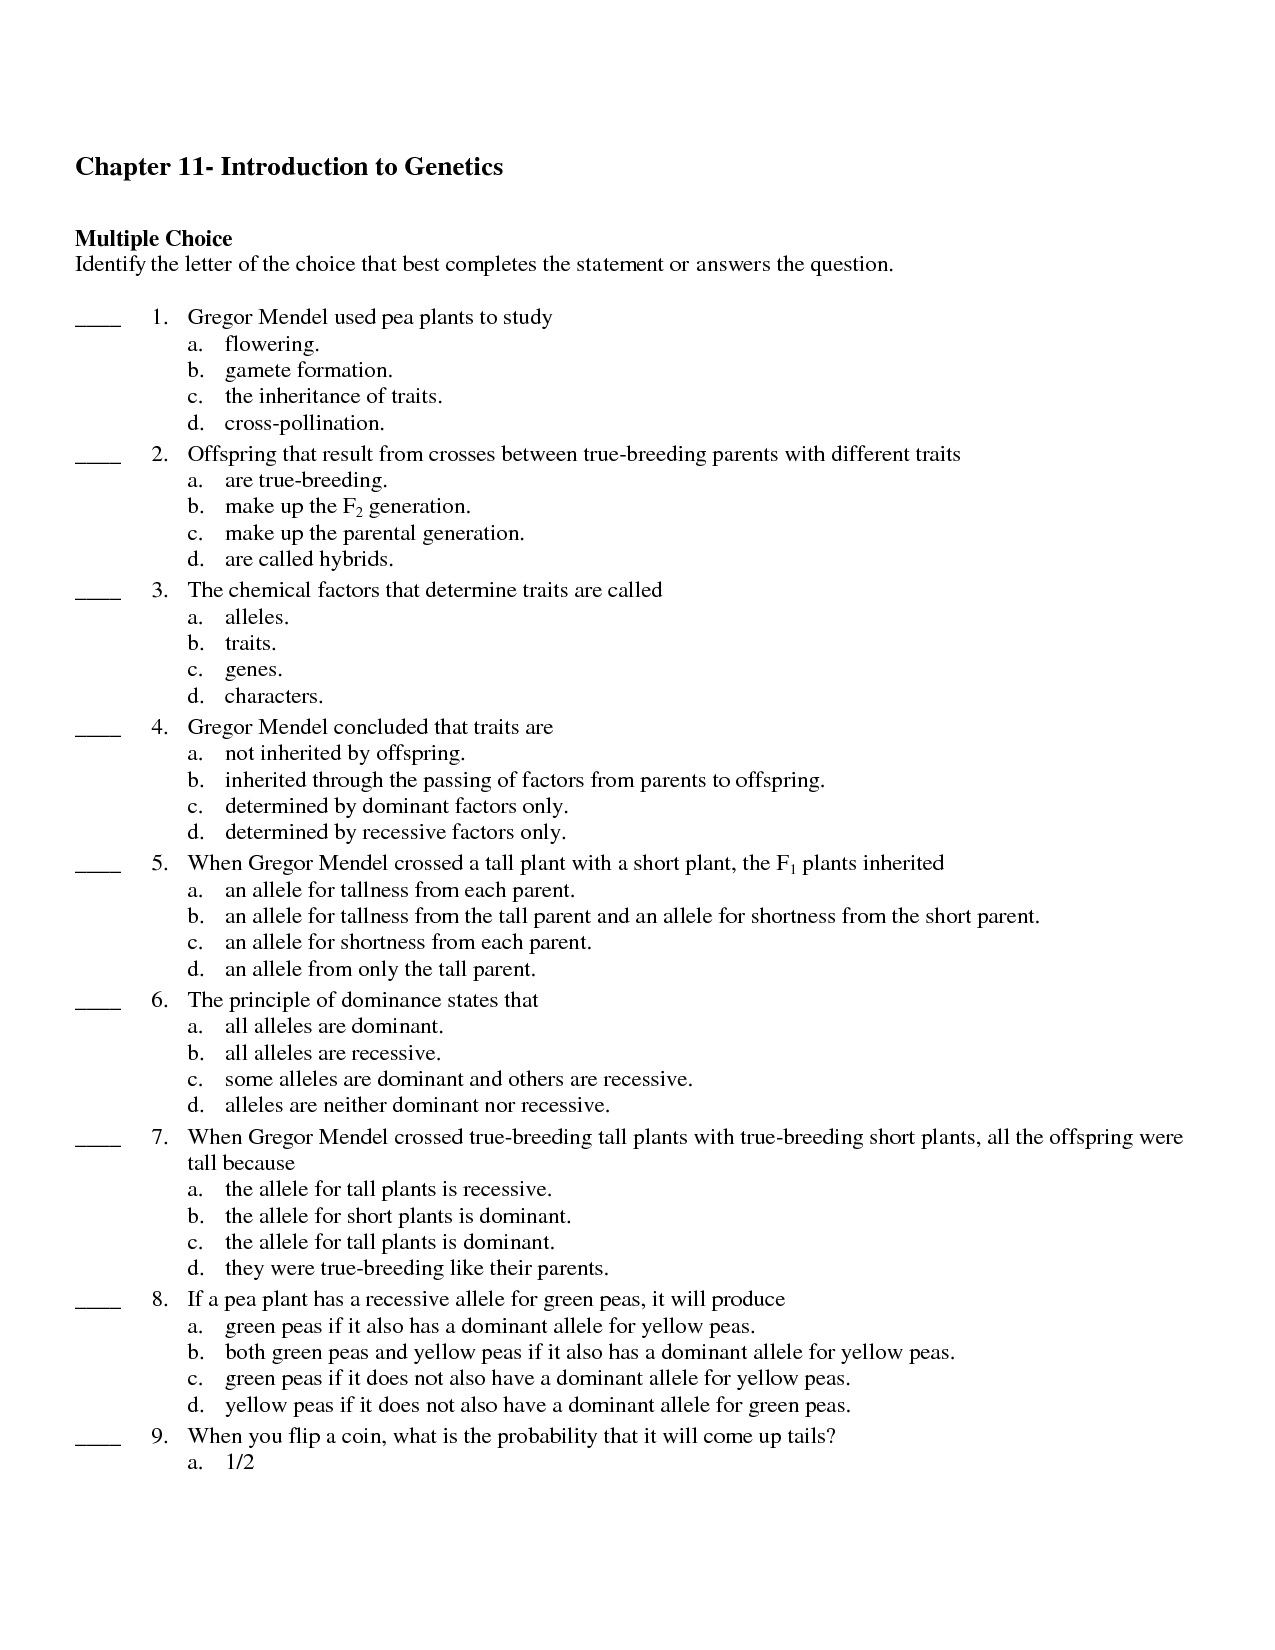 15-best-images-of-genetic-traits-wheel-worksheet-dominant-and-recessive-traits-worksheets